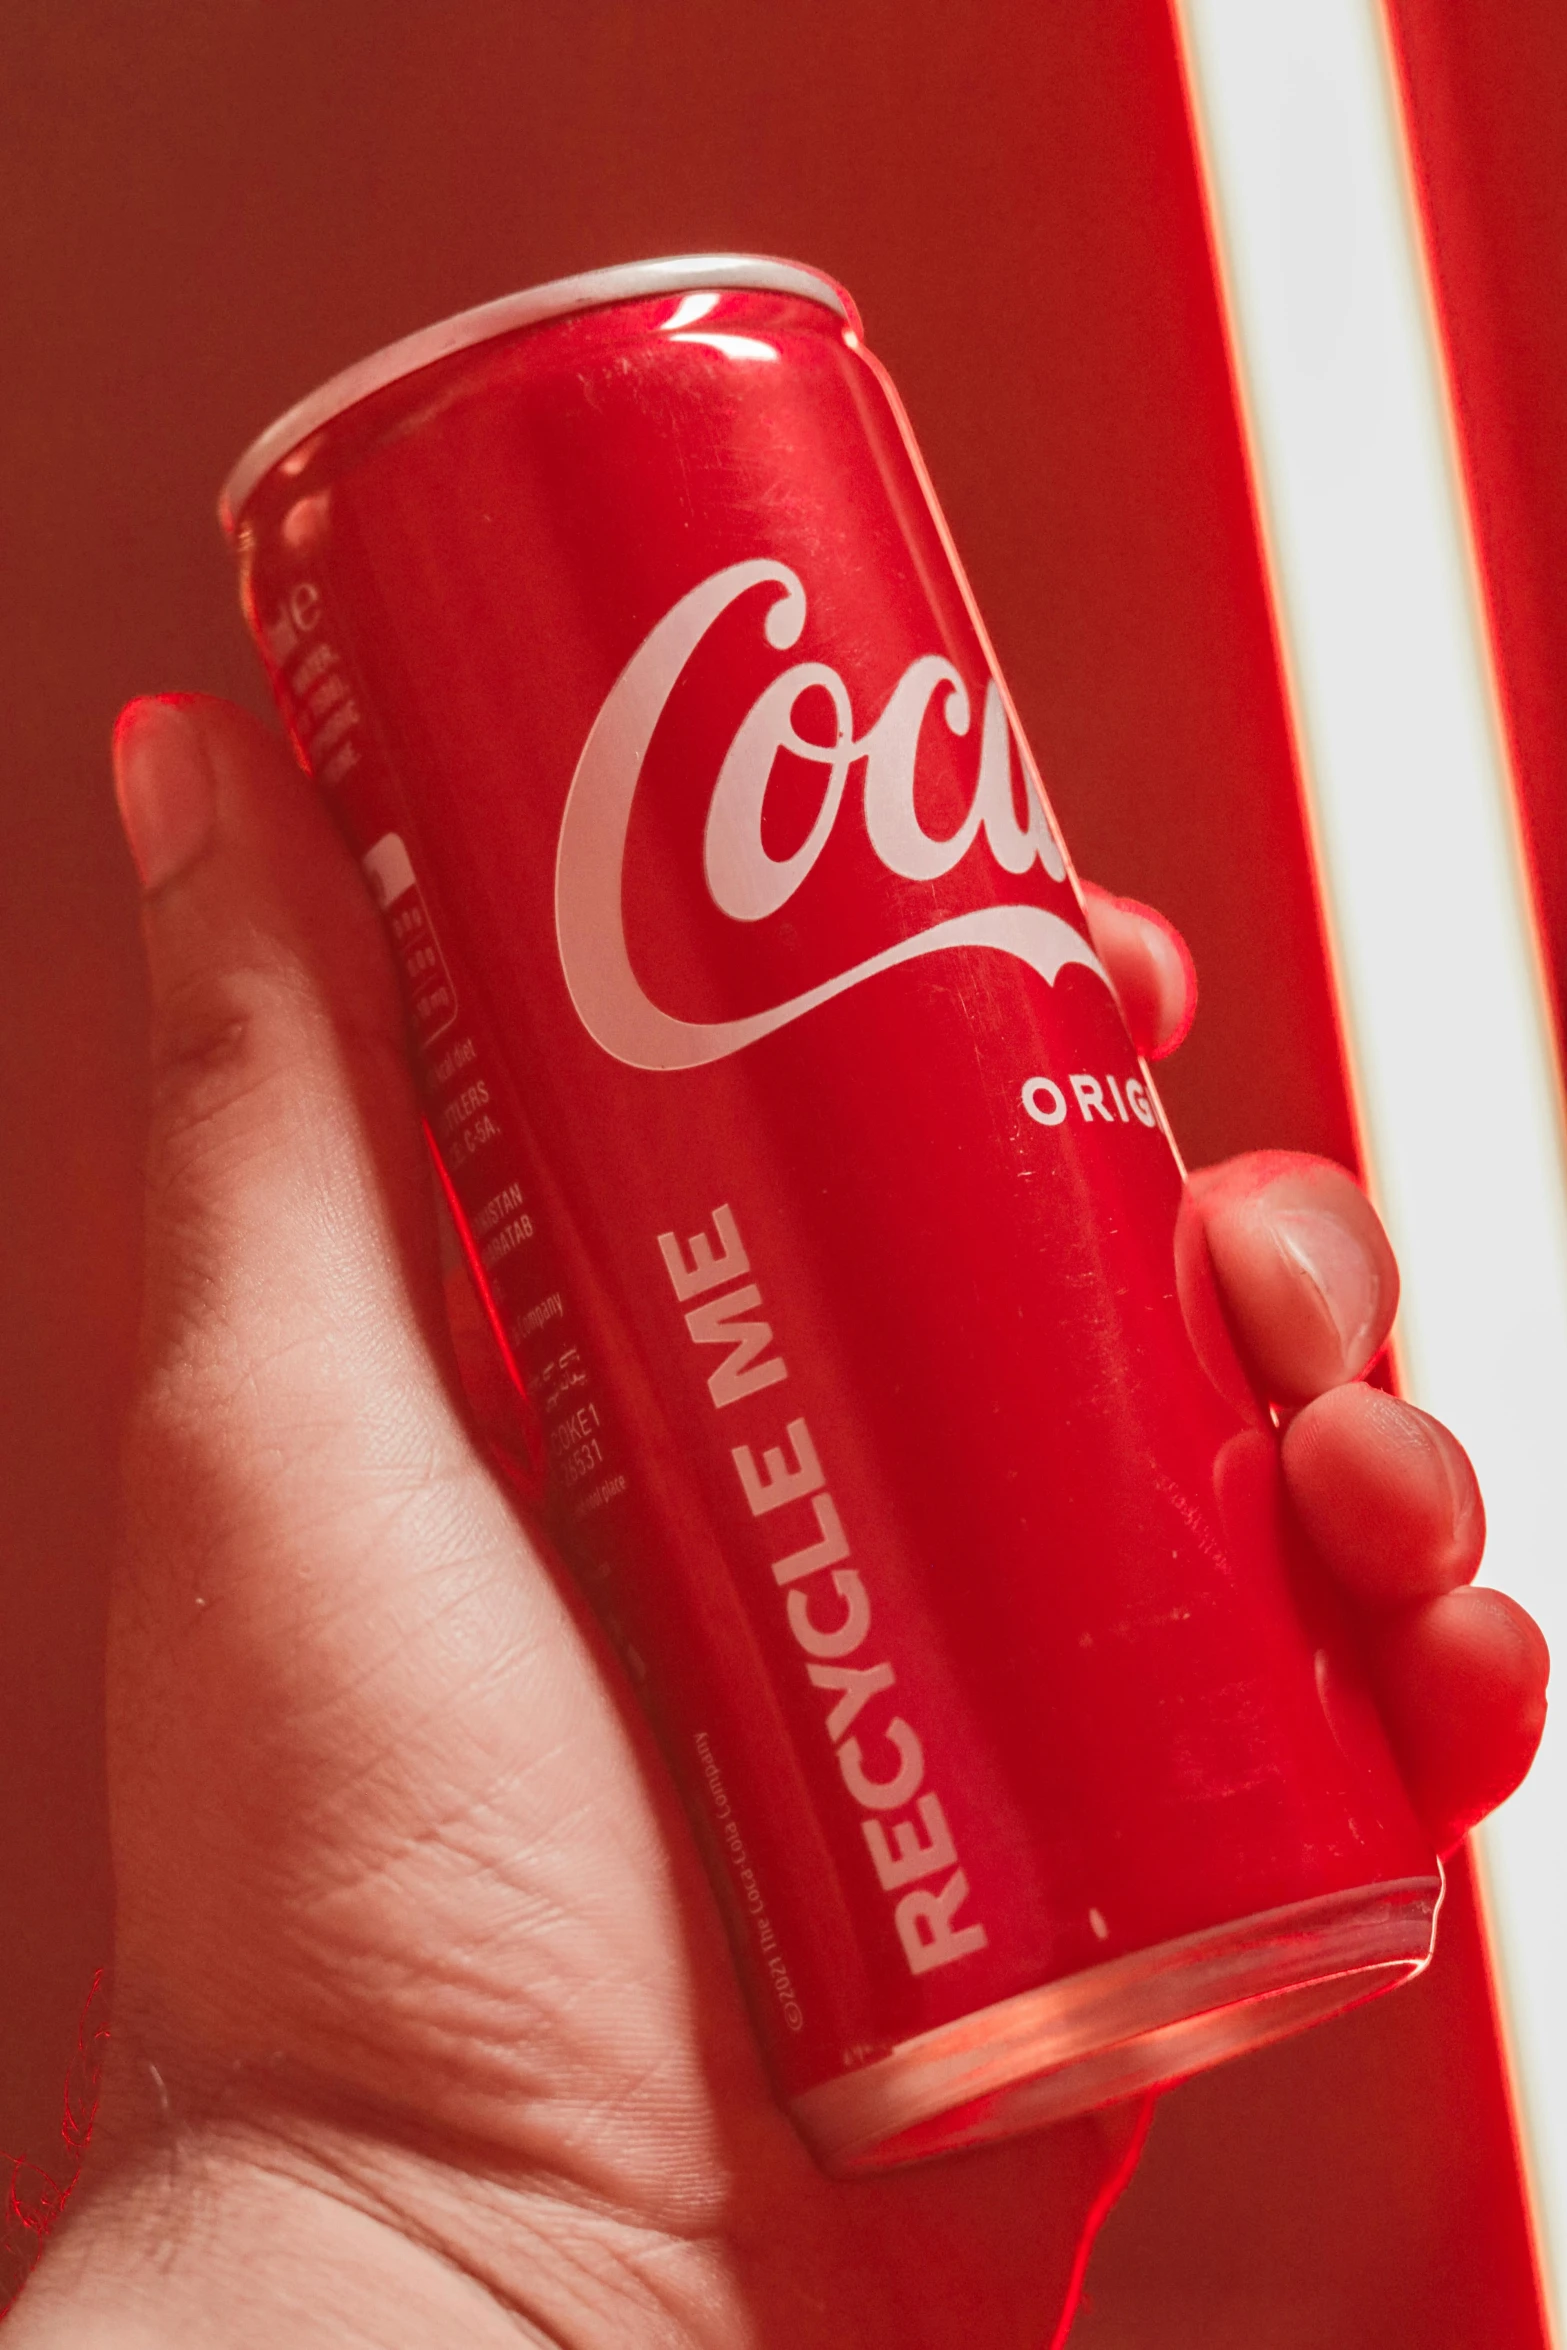 a hand is holding up a red coca cola can